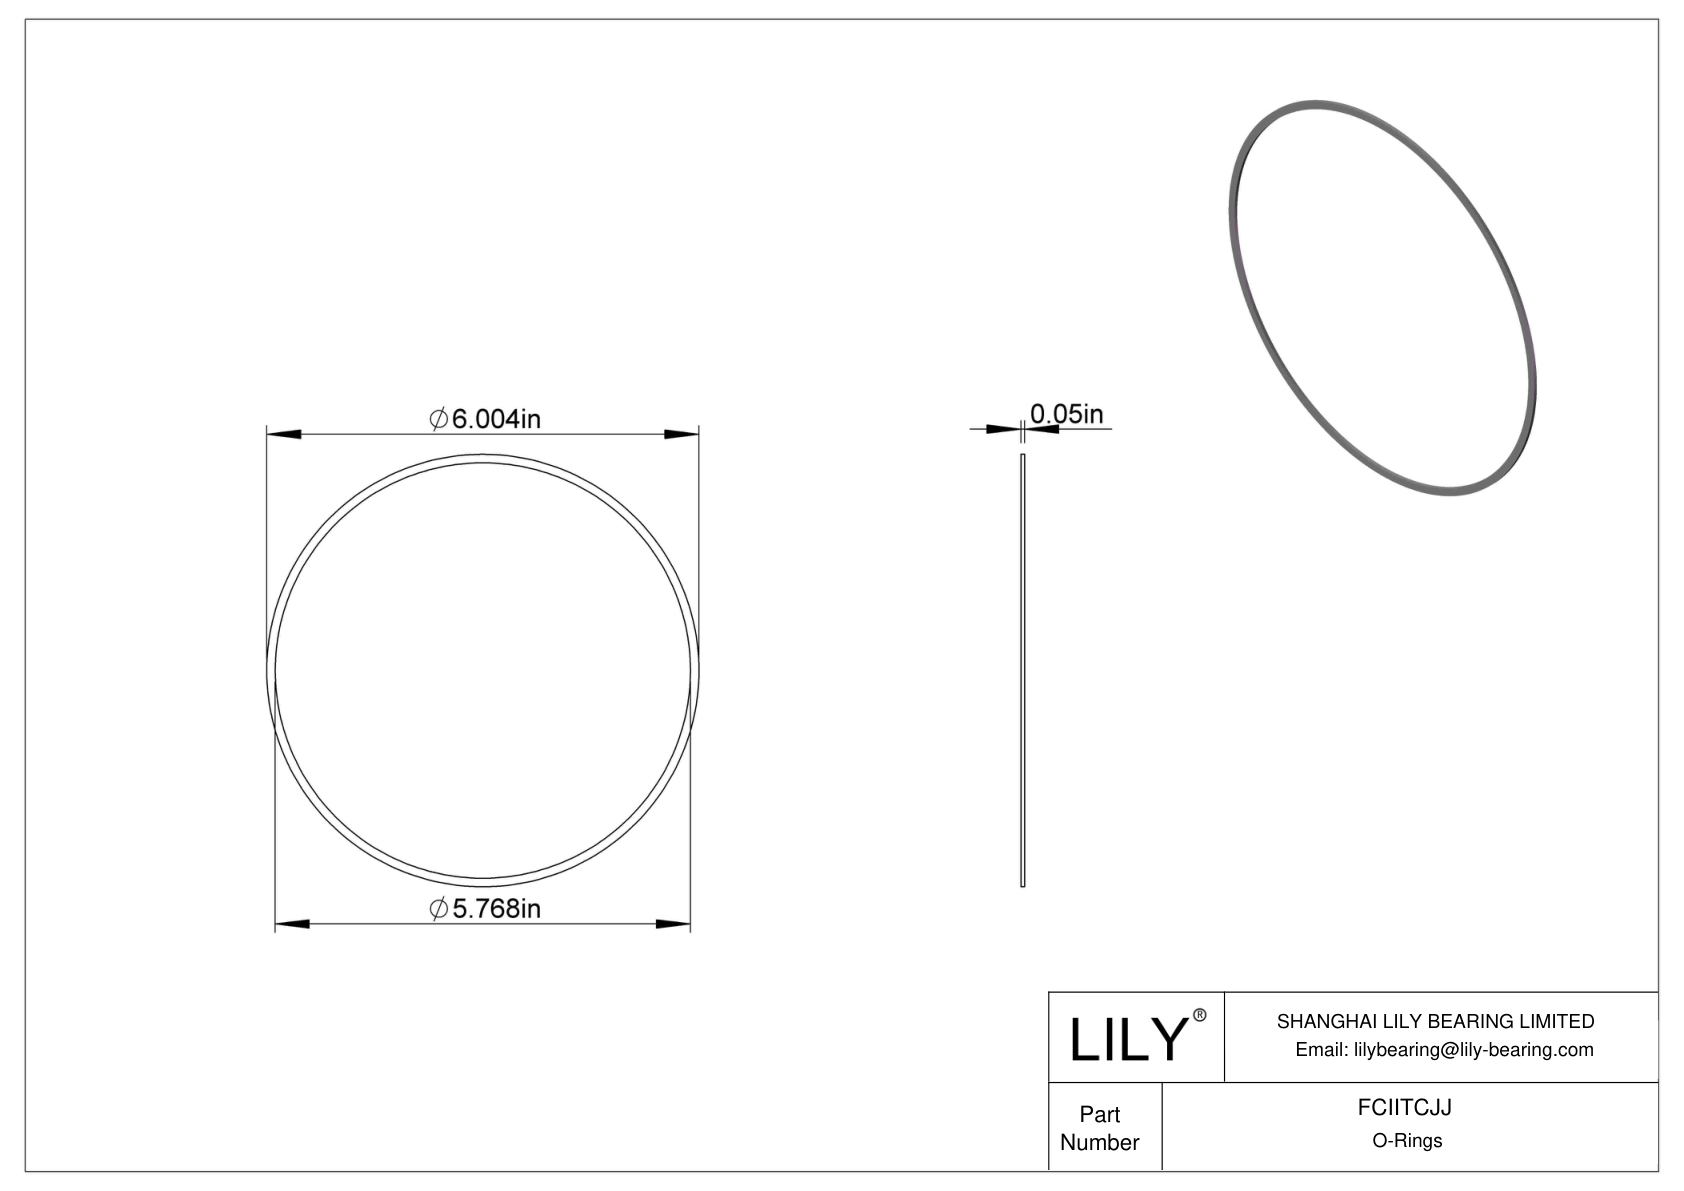 FCIITCJJ O-Ring Backup Rings cad drawing